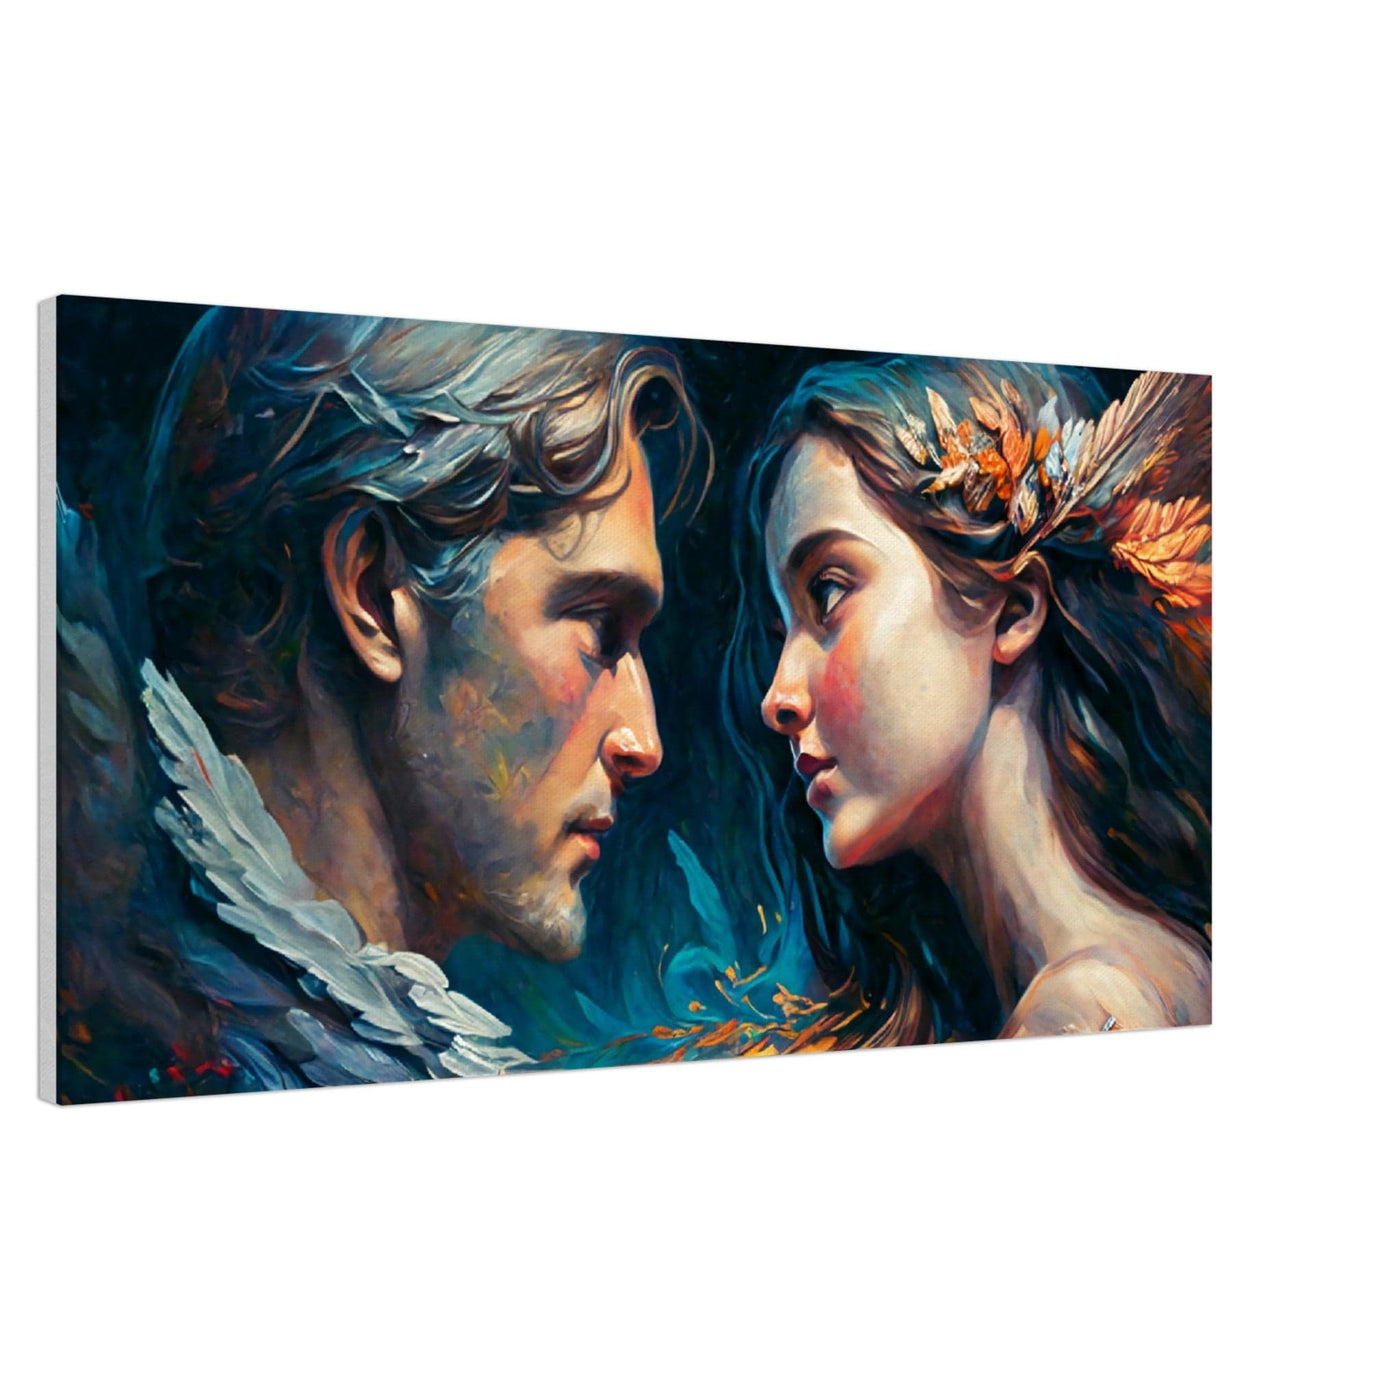 The Eternality of Love: Orpheus and Eurydice - Oil Painting Printed Canvas. 50X100.